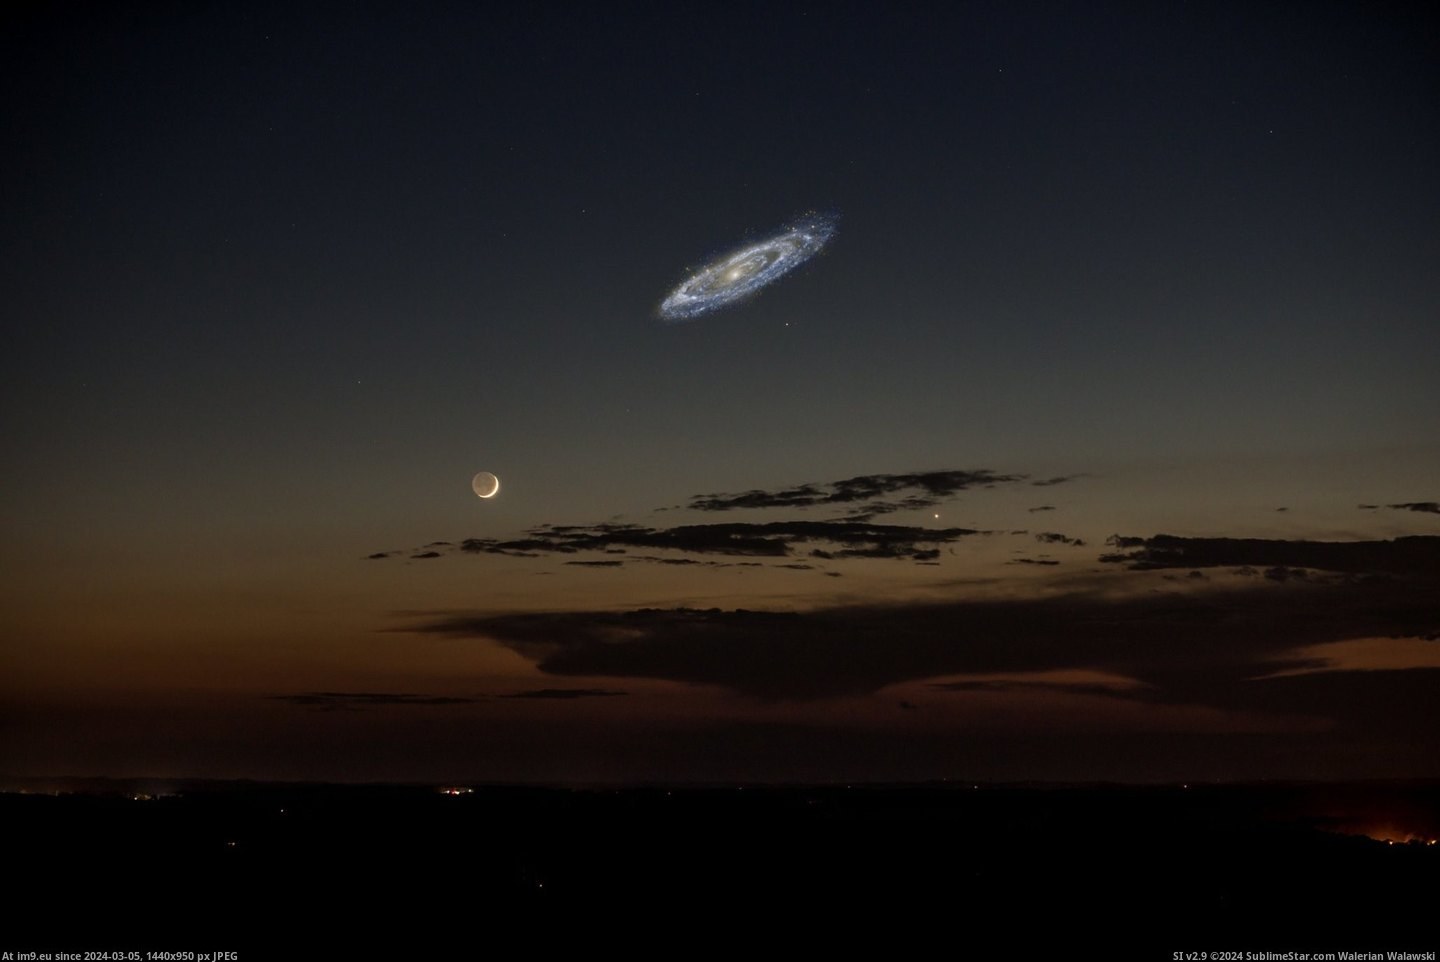 #Size #Andromeda #Brighter #Actual [Pics] Andromeda's actual size if it were brighter Pic. (Изображение из альбом My r/PICS favs))